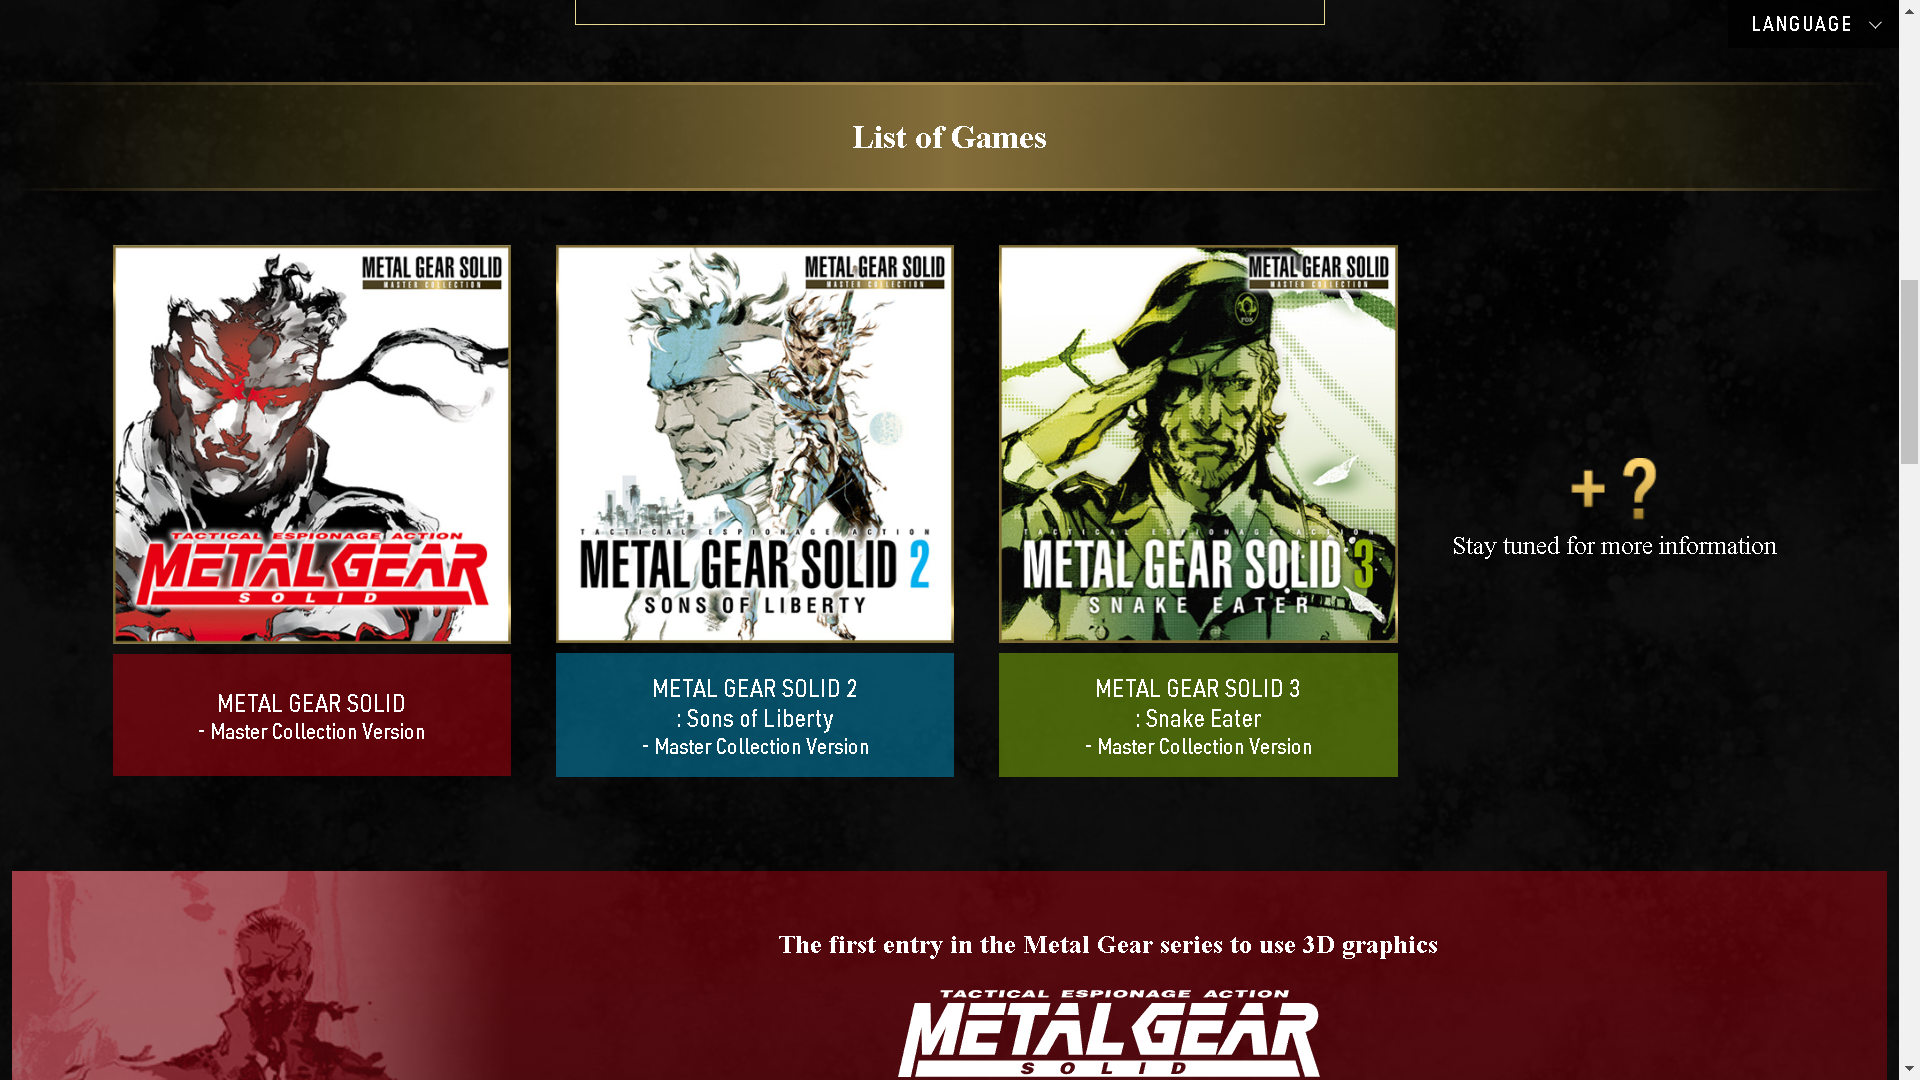 Metal Gear Solid Delta Snake Eater better be a 1:1 Remake if their slo, mgs 3 remake